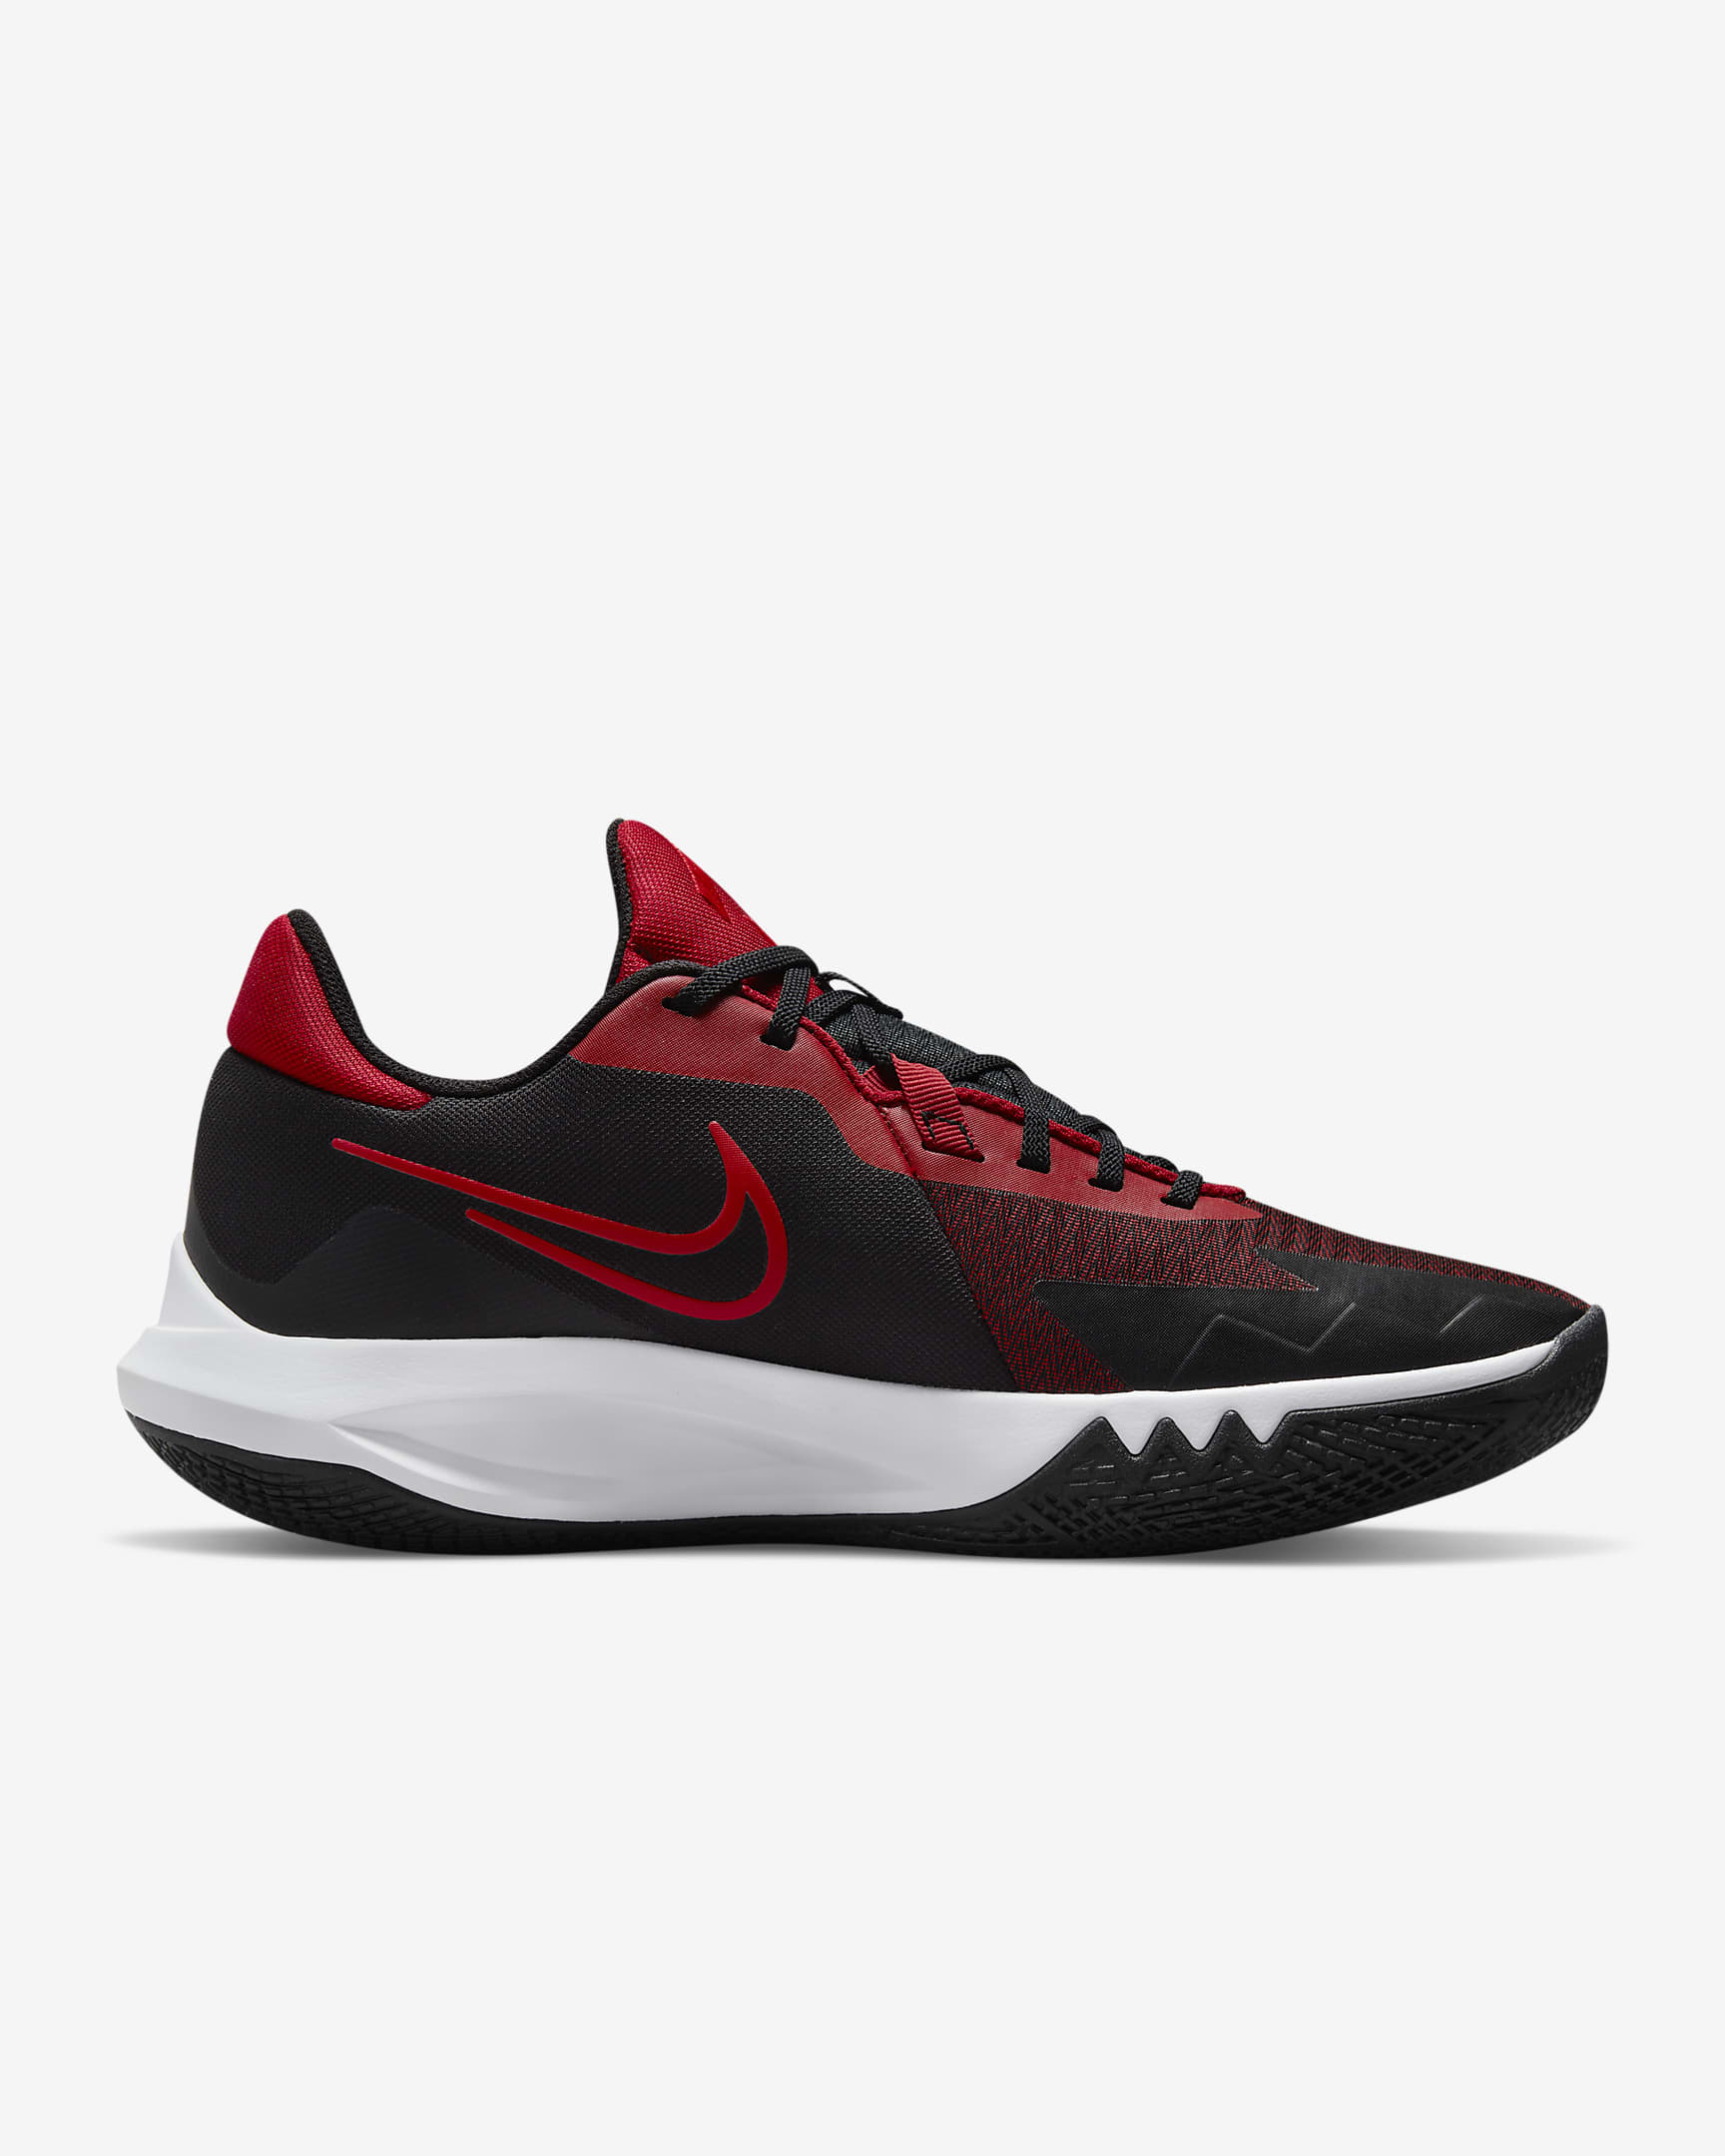 Nike Precision 6 Basketball Shoes - Black/Gym Red/University Red